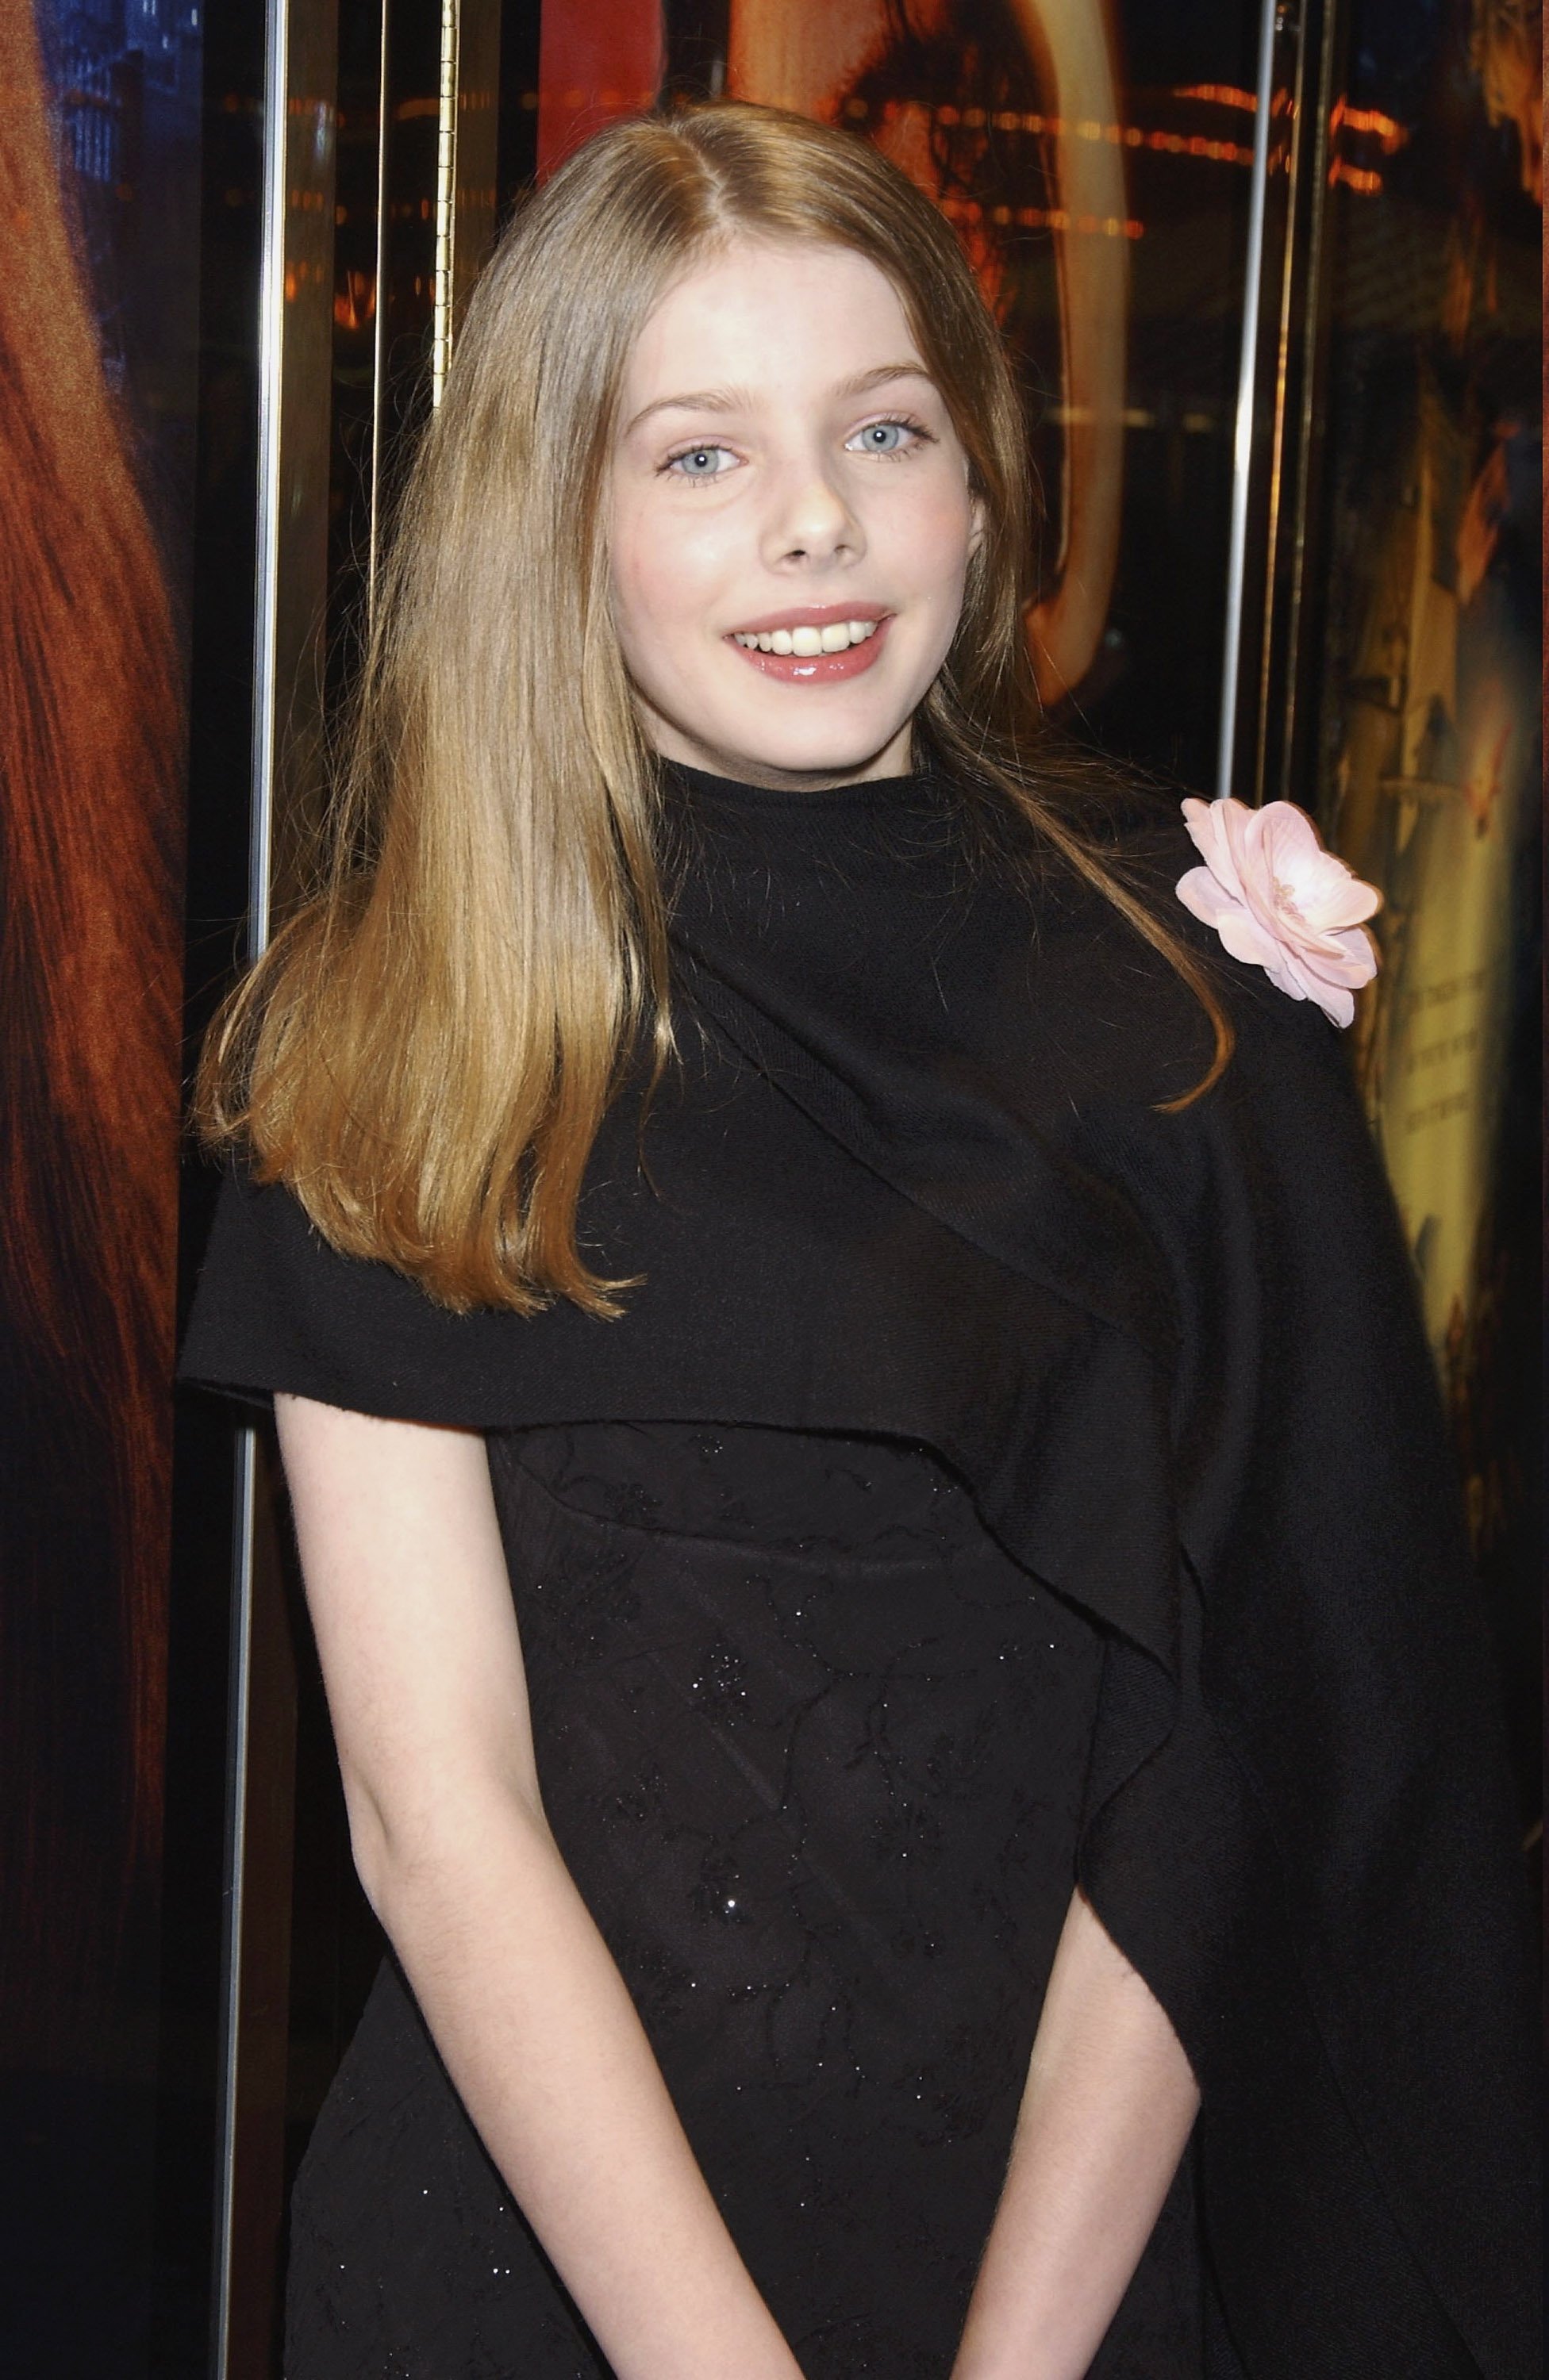 Rachel Hurd-Wood attends the "Peter Pan The Movie" premiere at the Empire, Leicester Square on December 10, 2003, in London. | Source: Getty Images